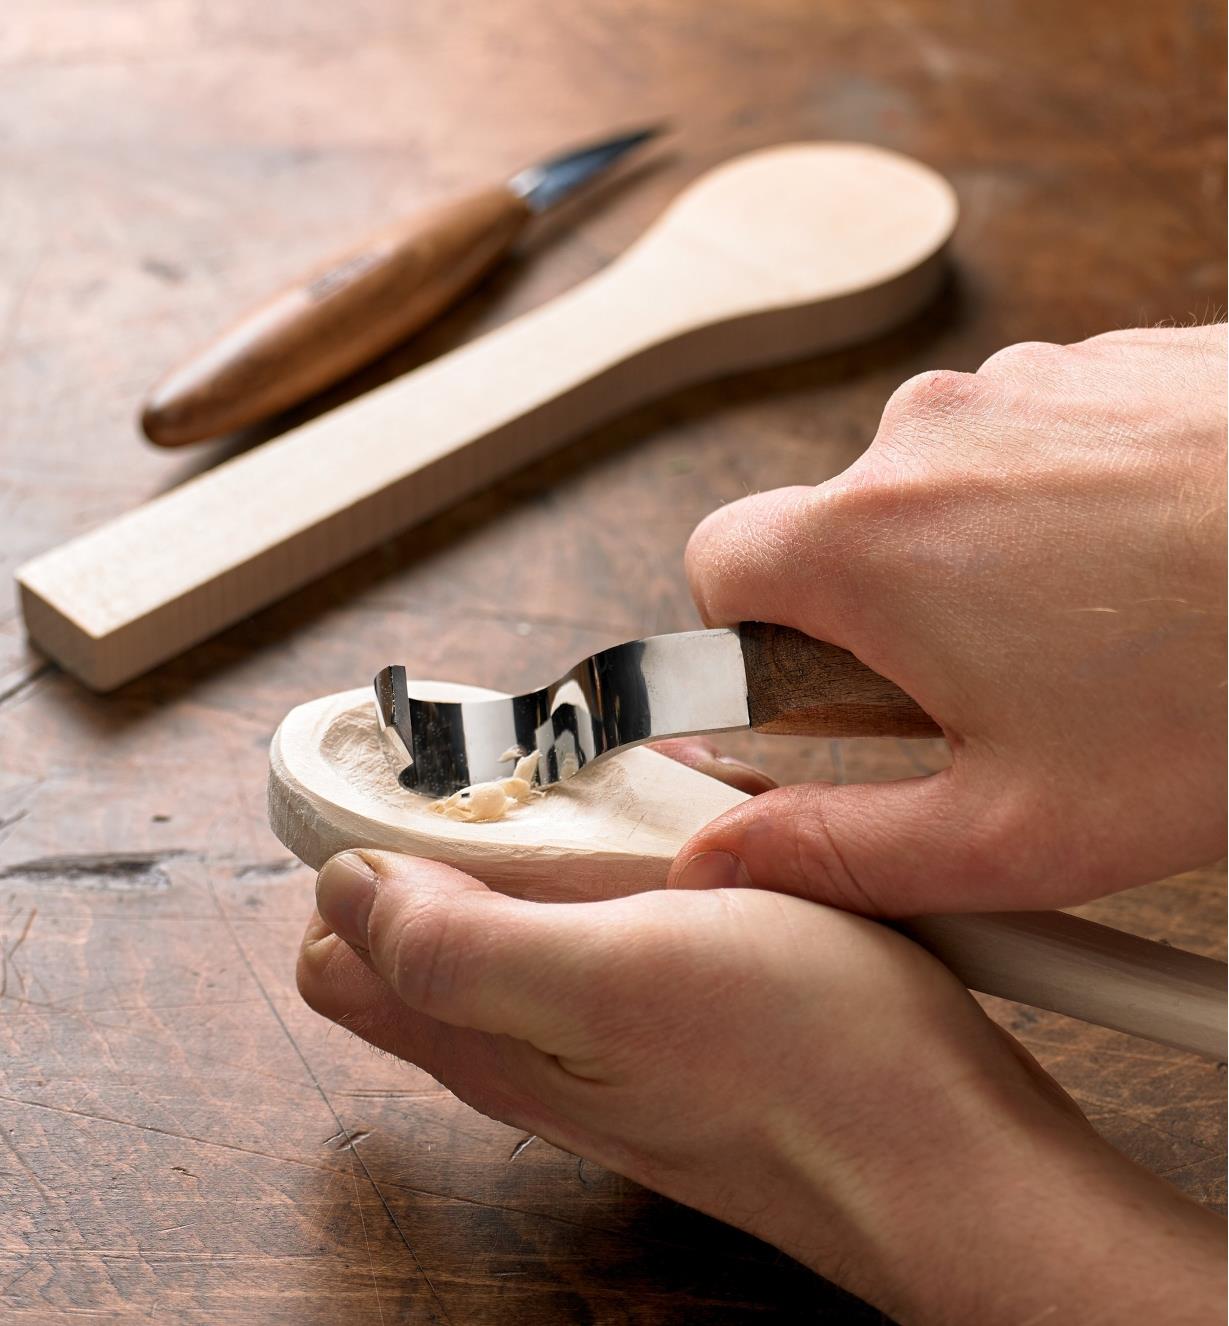 Hollowing the bowl of a wooden spoon with the hook knife